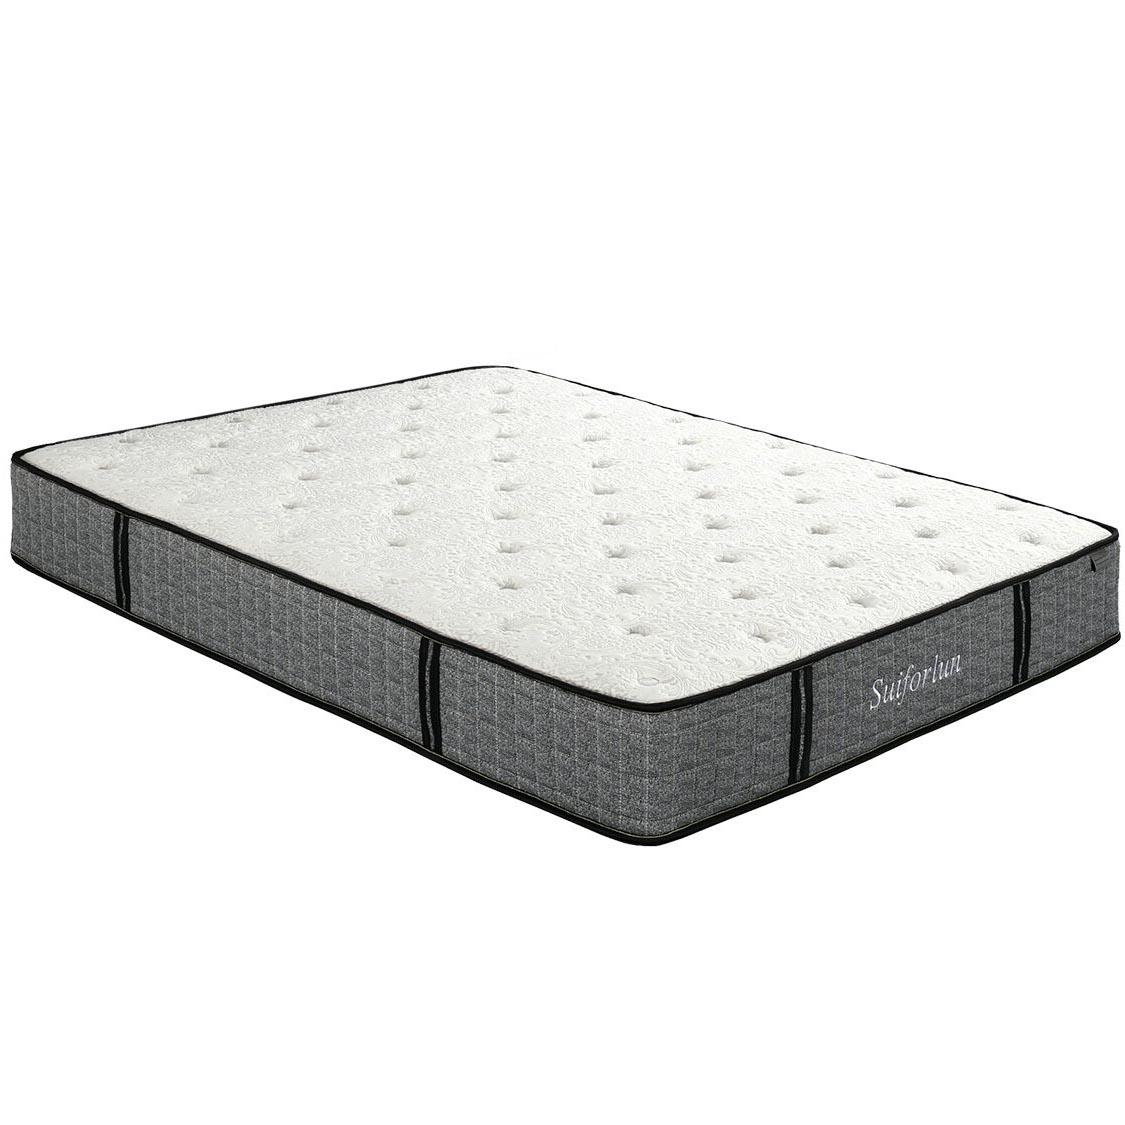 Suiforlun mattress coils innerspring hybrid bed wholesale for home